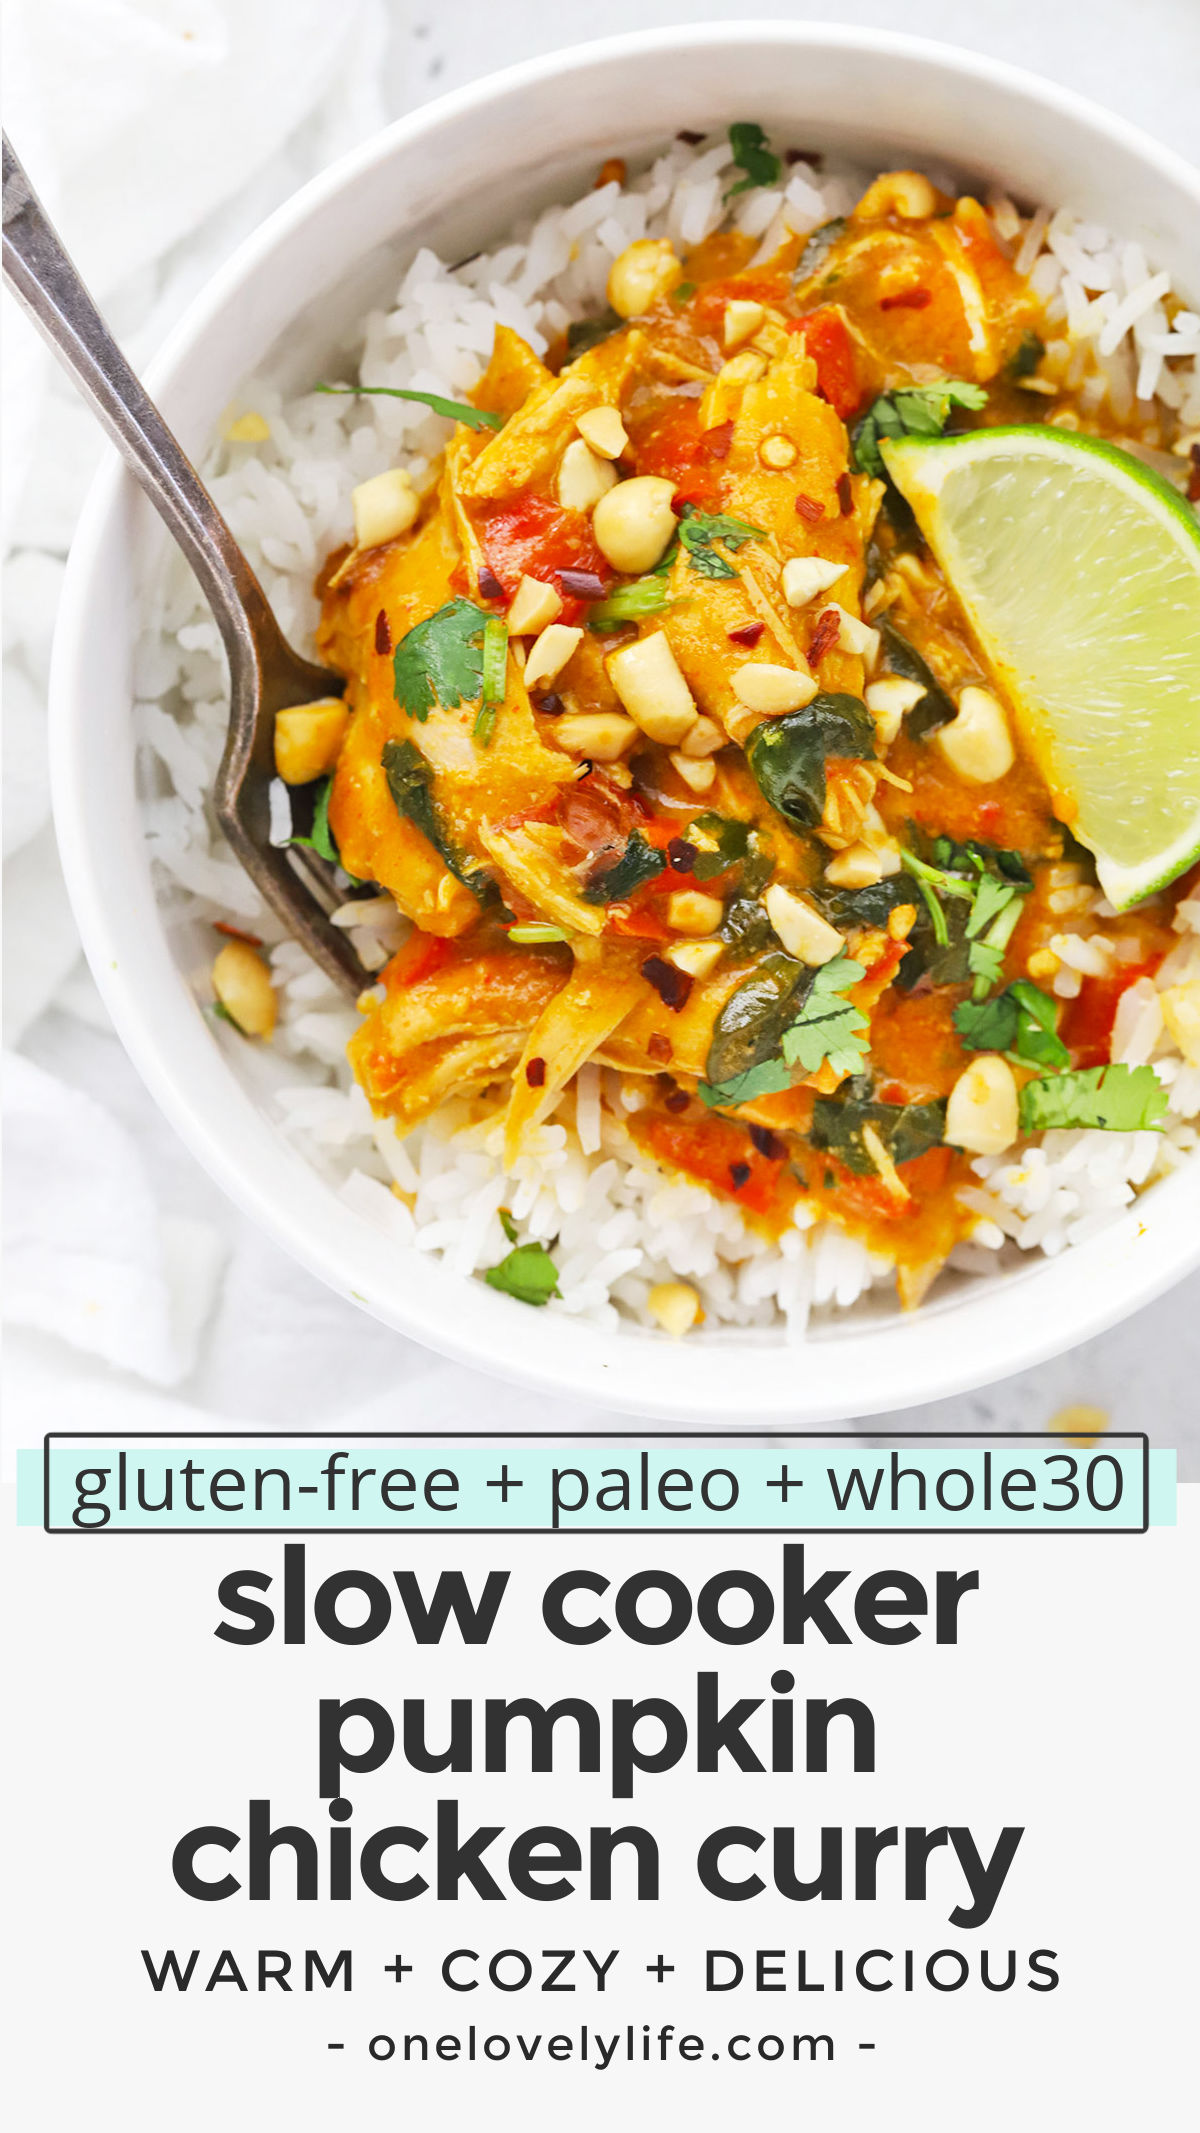 Slow Cooker Pumpkin Chicken Curry - This cozy pumpkin curry has tender chicken, colorful veggies & a mega-flavorful sauce to warm you up from the inside out. (Paleo, Whole30, Gluten-Free) // Pumpkin Curry Recipe // Slow cooker curry // savory pumpkin recipes // healthy dinner // paleo slow cooker recipe // whole30 slow cooker recipe // paleo chicken // healthy pumpkin recipe